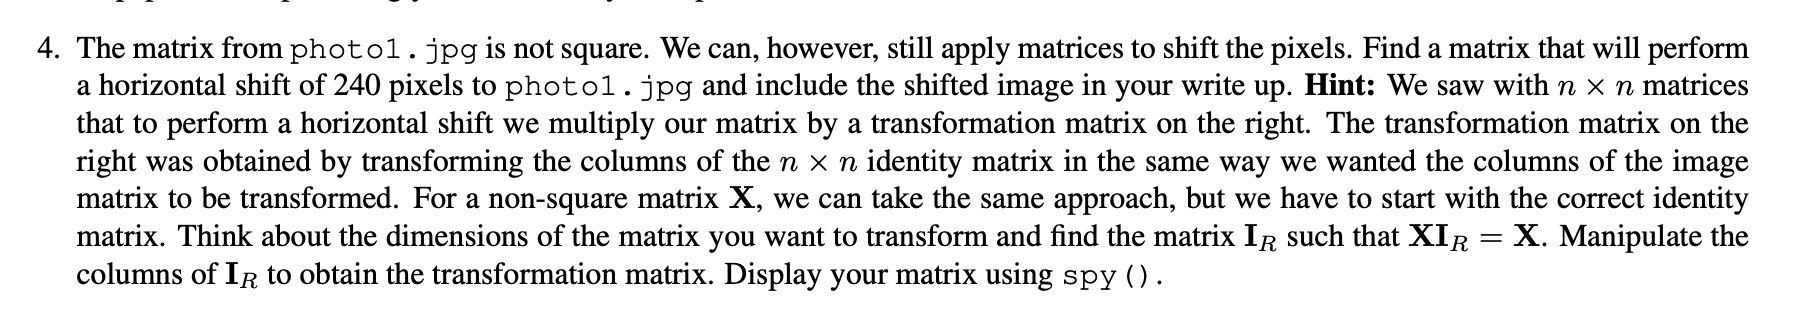 The matrix from photo1.jpg is not square. We can, however, still apply matrices to shift the pixels....